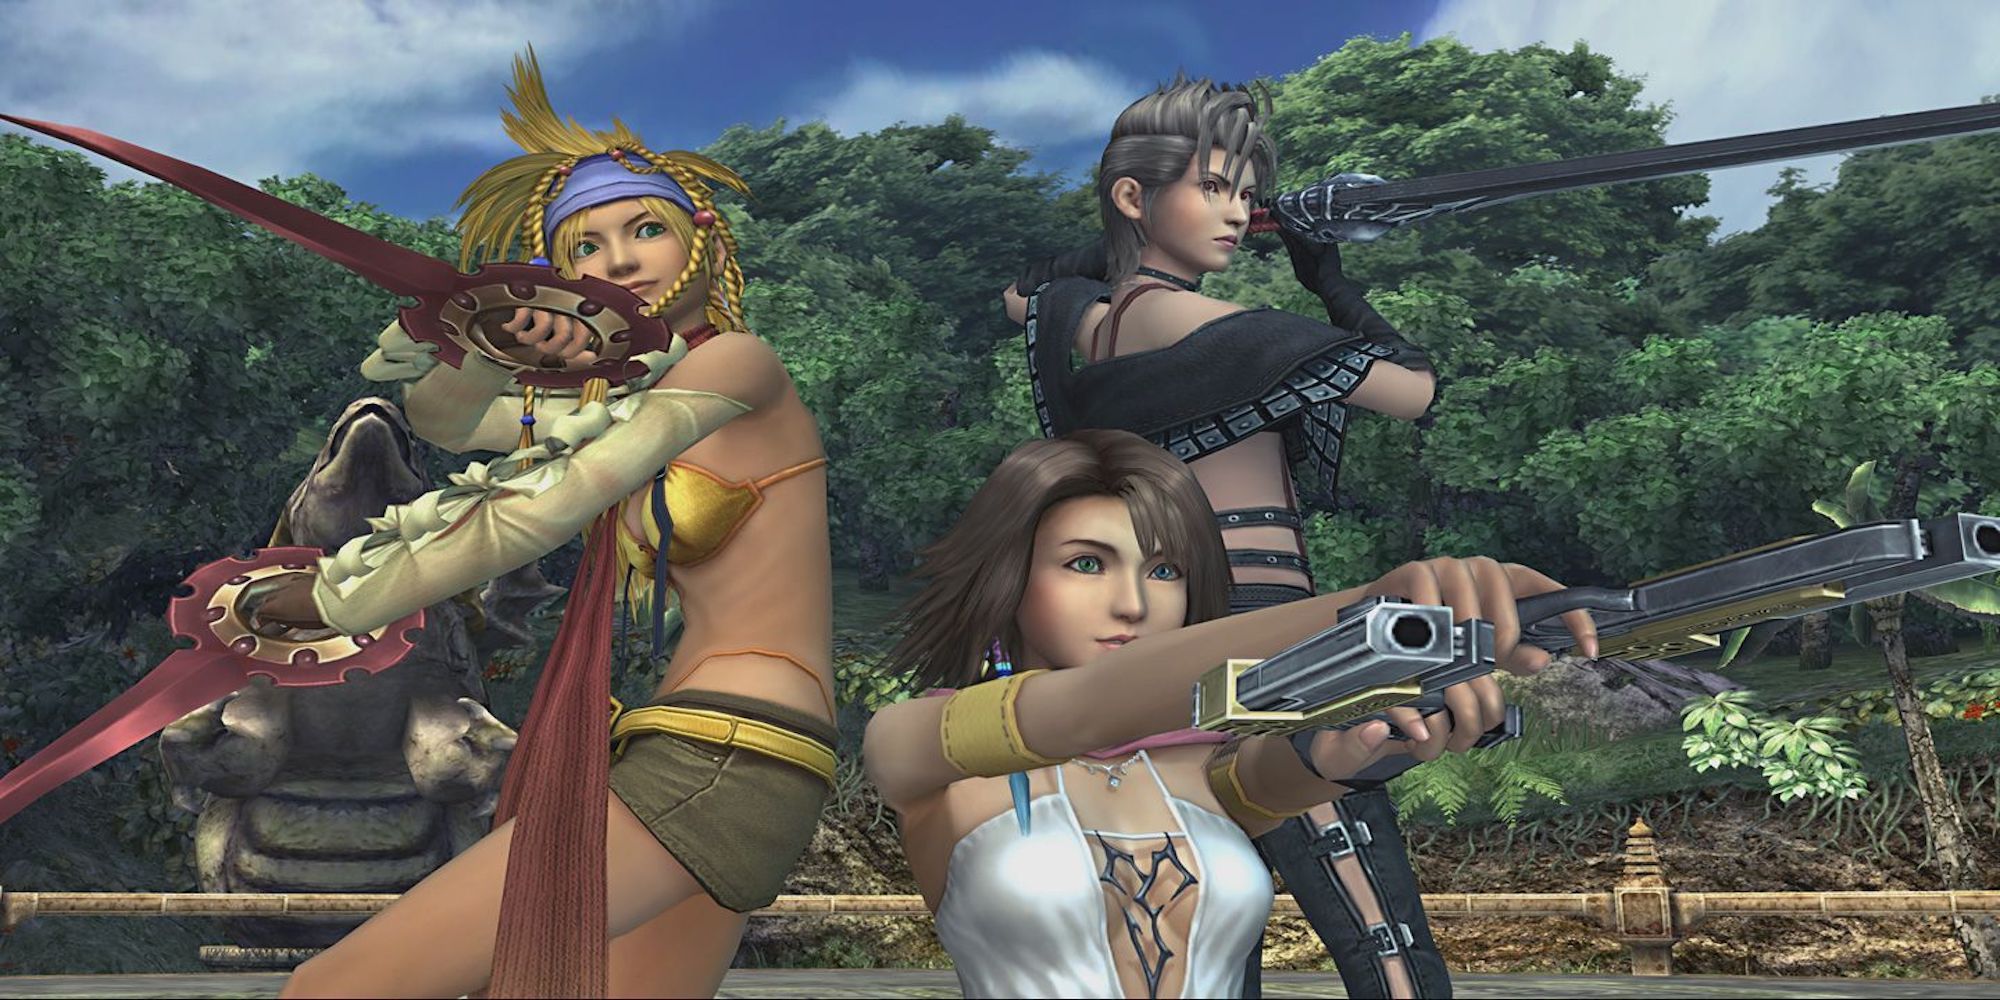 A cutscene featuring characters in Final Fantasy 10-2